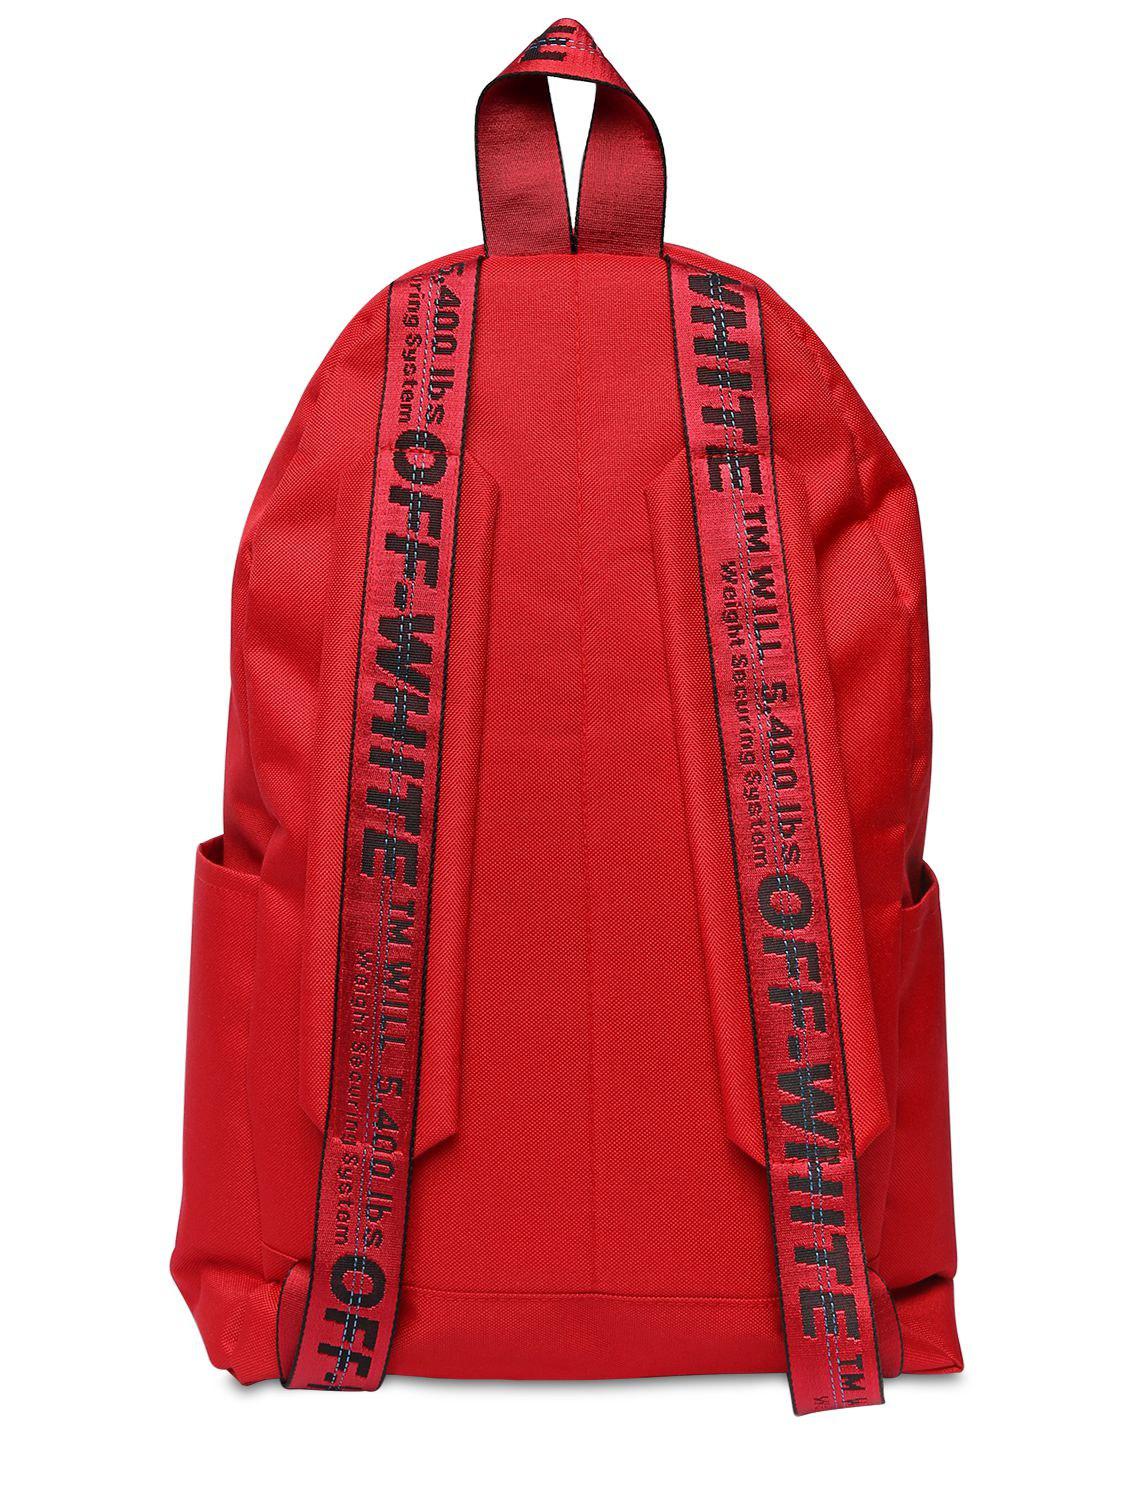 Off-White c/o Virgil Abloh Synthetic &quot;&quot;&quot;backpack&quot;&quot; Nylon Canvas Backpack&quot; in Red/White (Red) for ...